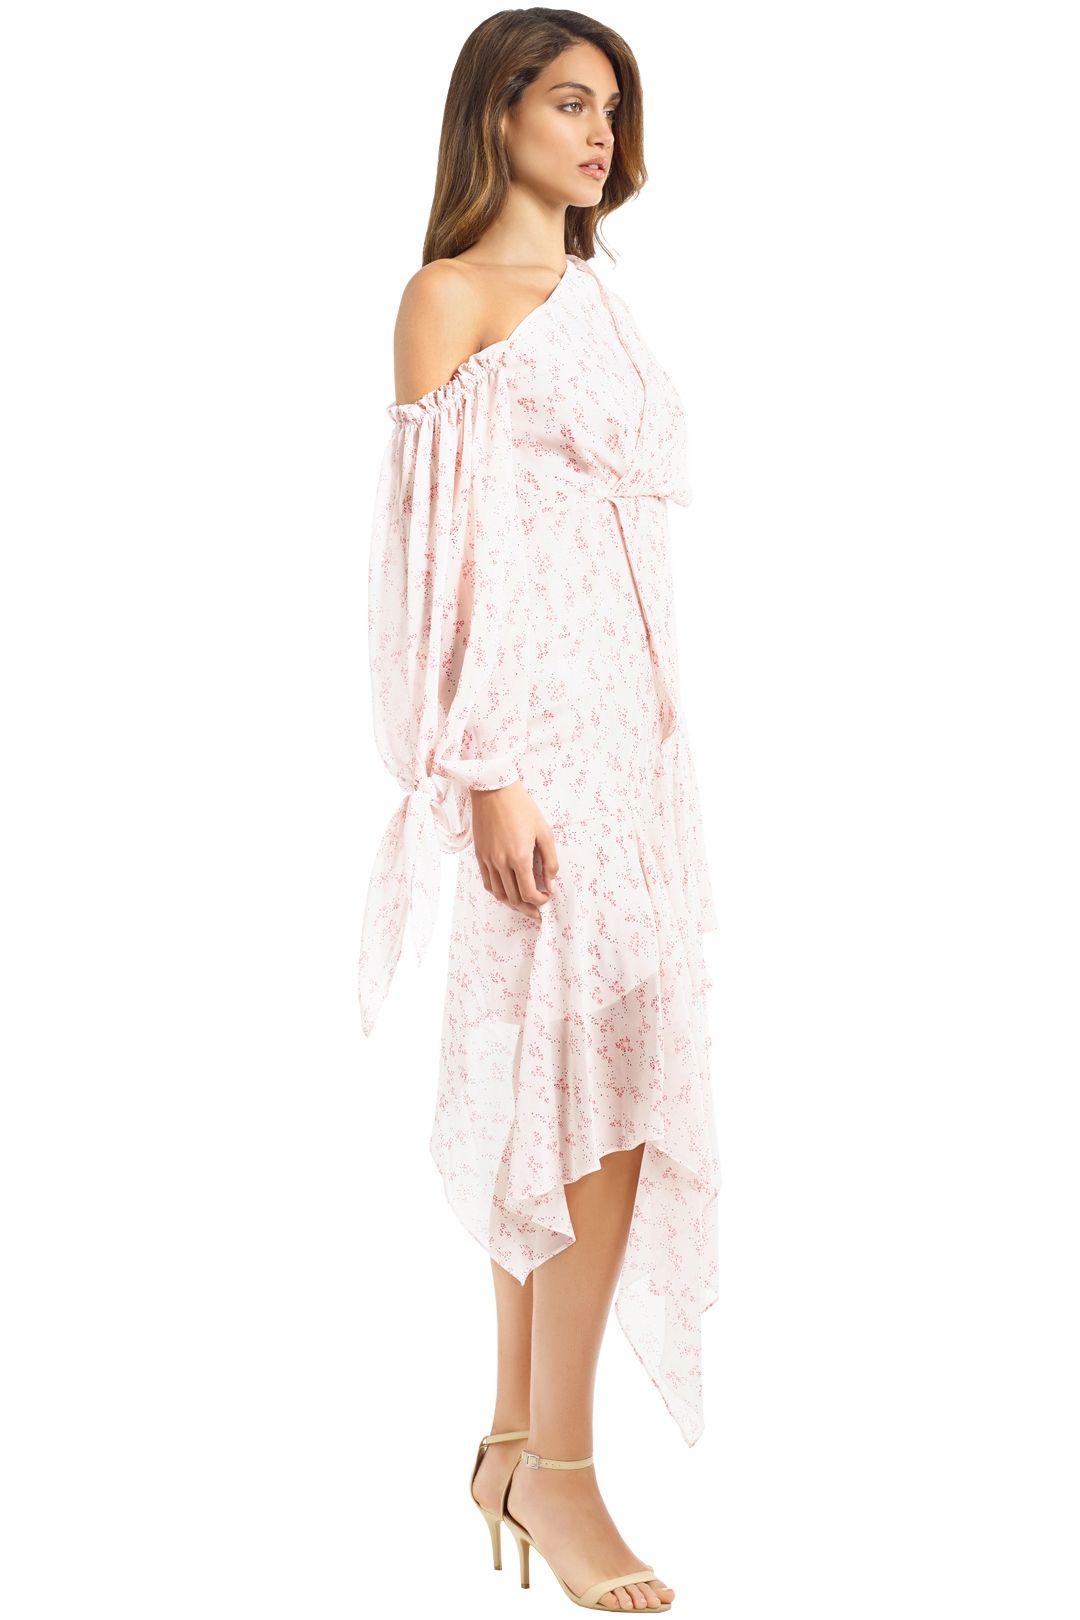 Acler - Aurora Rosewater Dress - Pink - Side